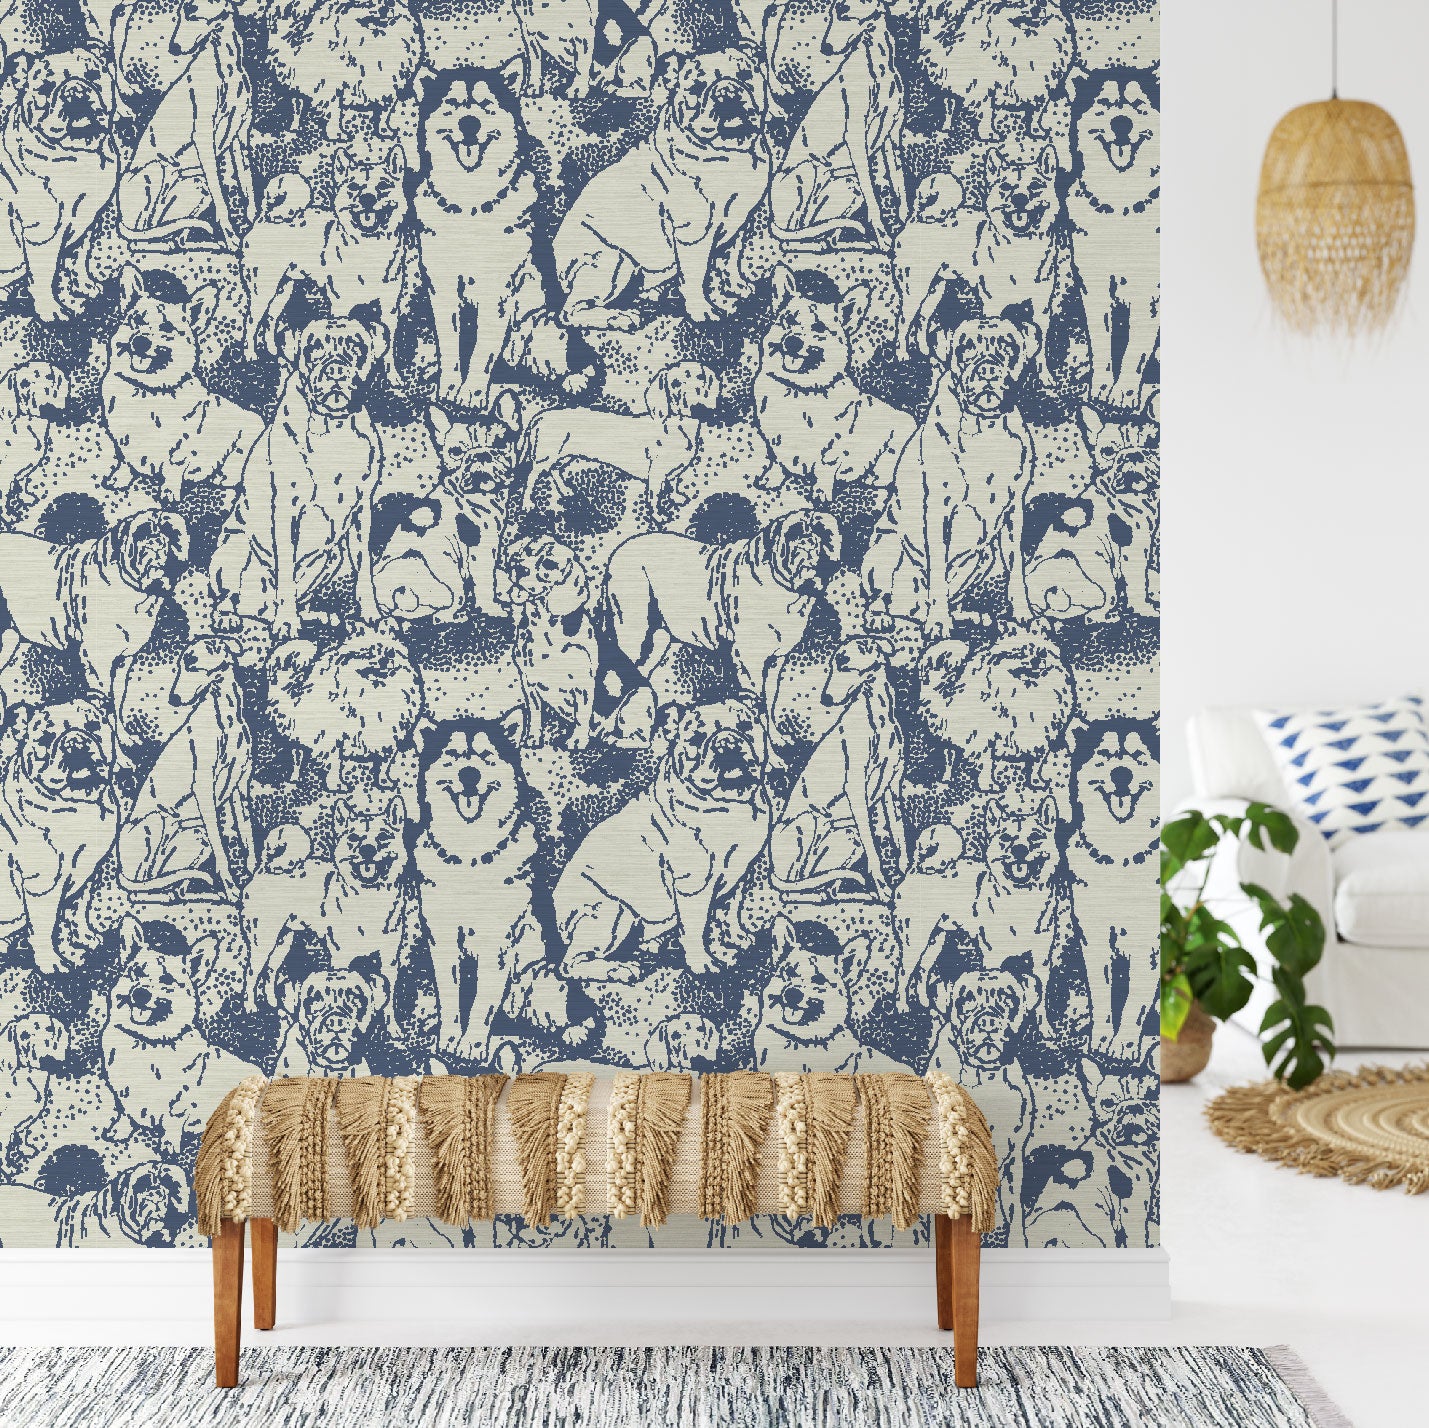 dog printed grasscloth wallpaper puppy huskie, bulldogs, mastiff, wiener, beagles, yorkie Natural Textured Eco-Friendly Non-toxic High-quality Sustainable Interior Design Bold Custom kids mudroom veterinary grooming animal pink olive cream white off-white navy slate grey neutral foyer entrance